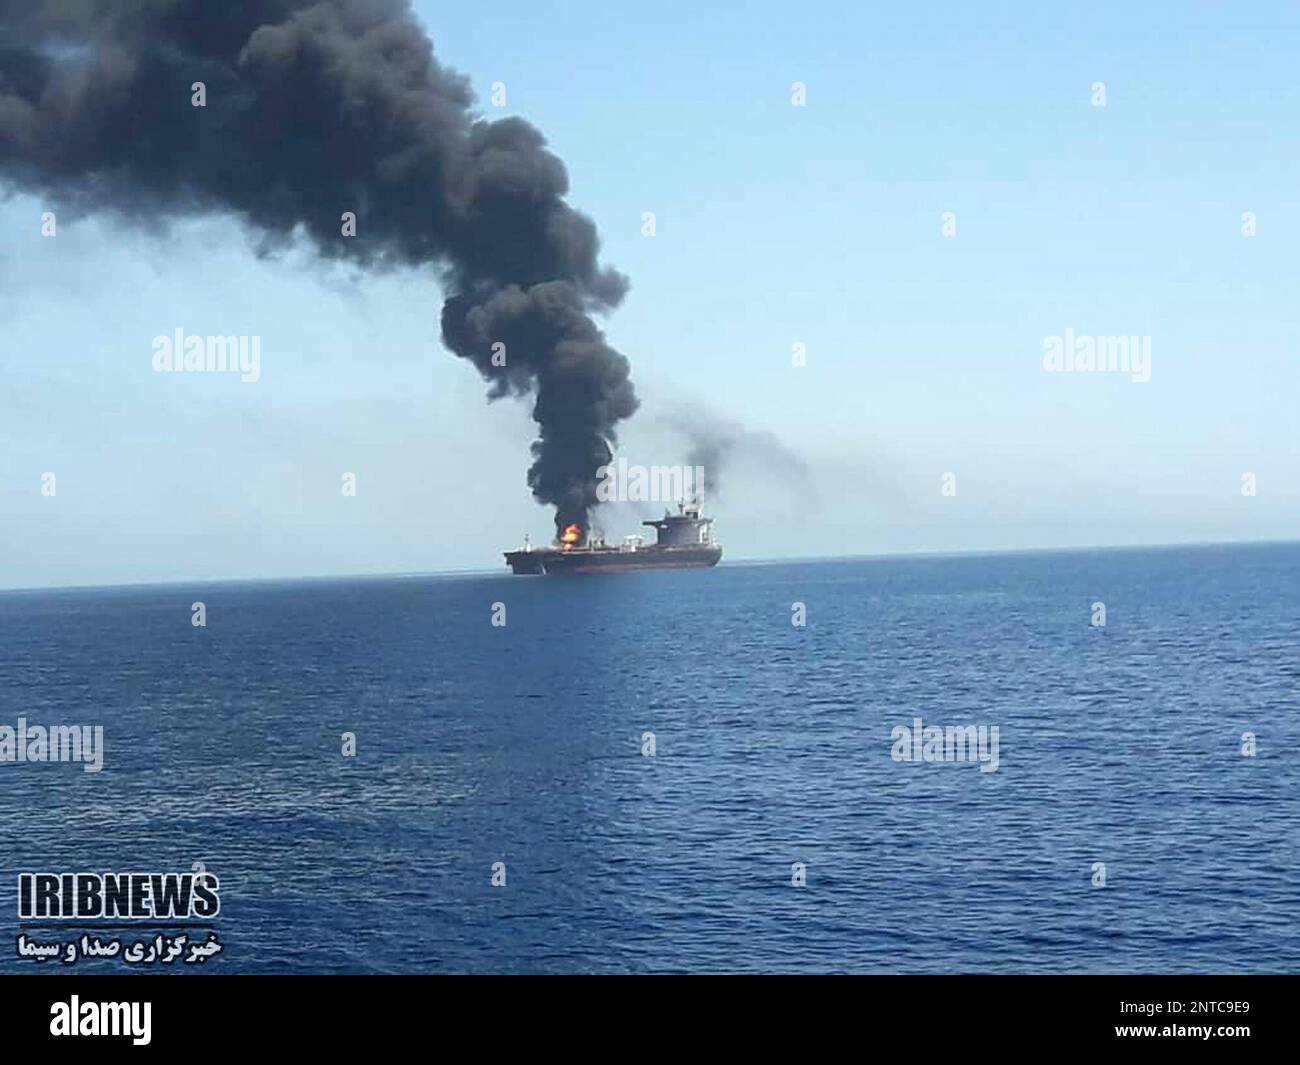 In this photo released by state-run IRIB News Agency, an oil tanker is on fire in the sea of Oman, Thursday, June 13, 2019. Two oil tankers near the strategic Strait of Hormuz have been reportedly attacked. The alleged assault on Thursday left one ablaze and adrift as sailors were evacuated from both vessels. The U.S. Navy rushed to assist amid heightened tensions between Washington and Tehran. (IRIB News Agency via AP) Stock Photo